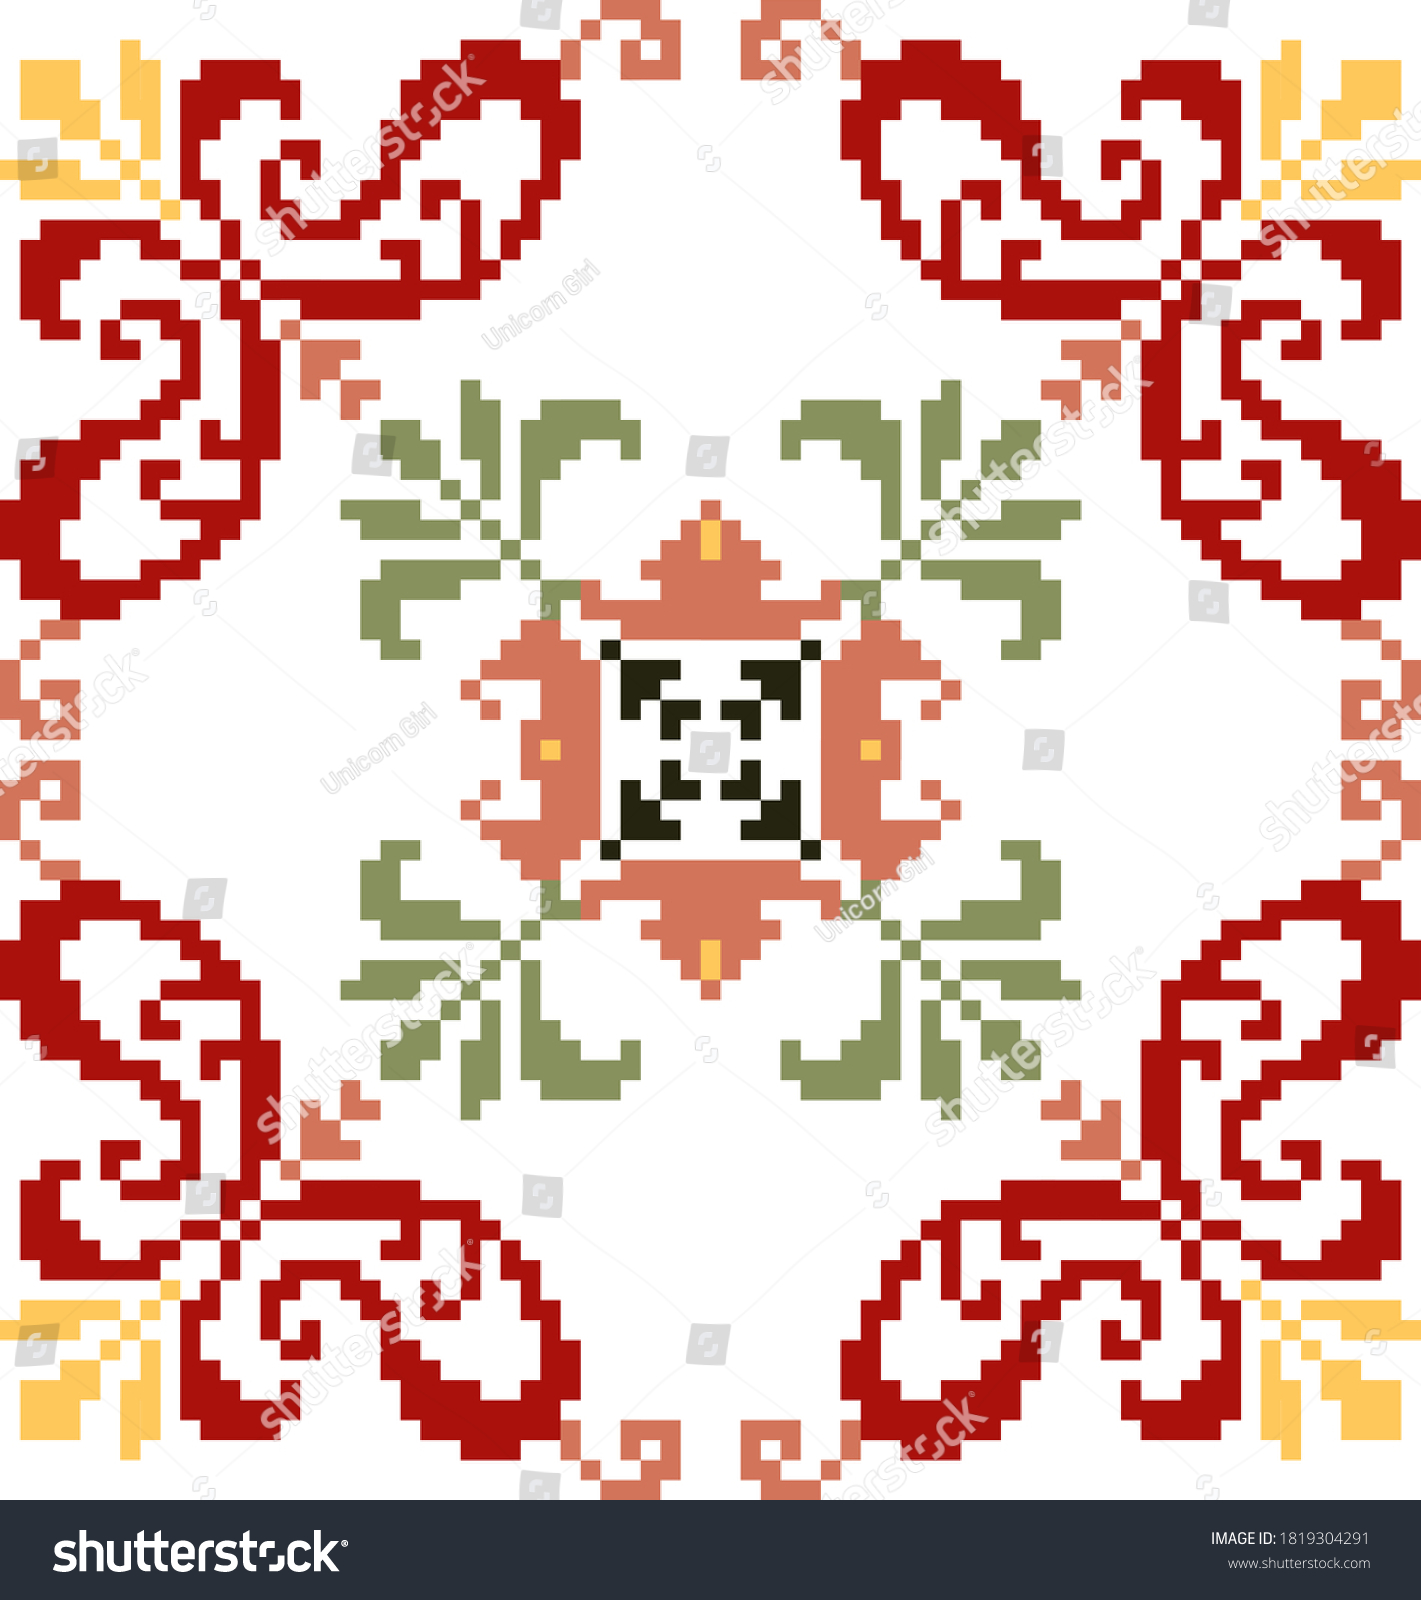 SVG of 
Scheme for cross-stitch flowers with leaves in red and green svg